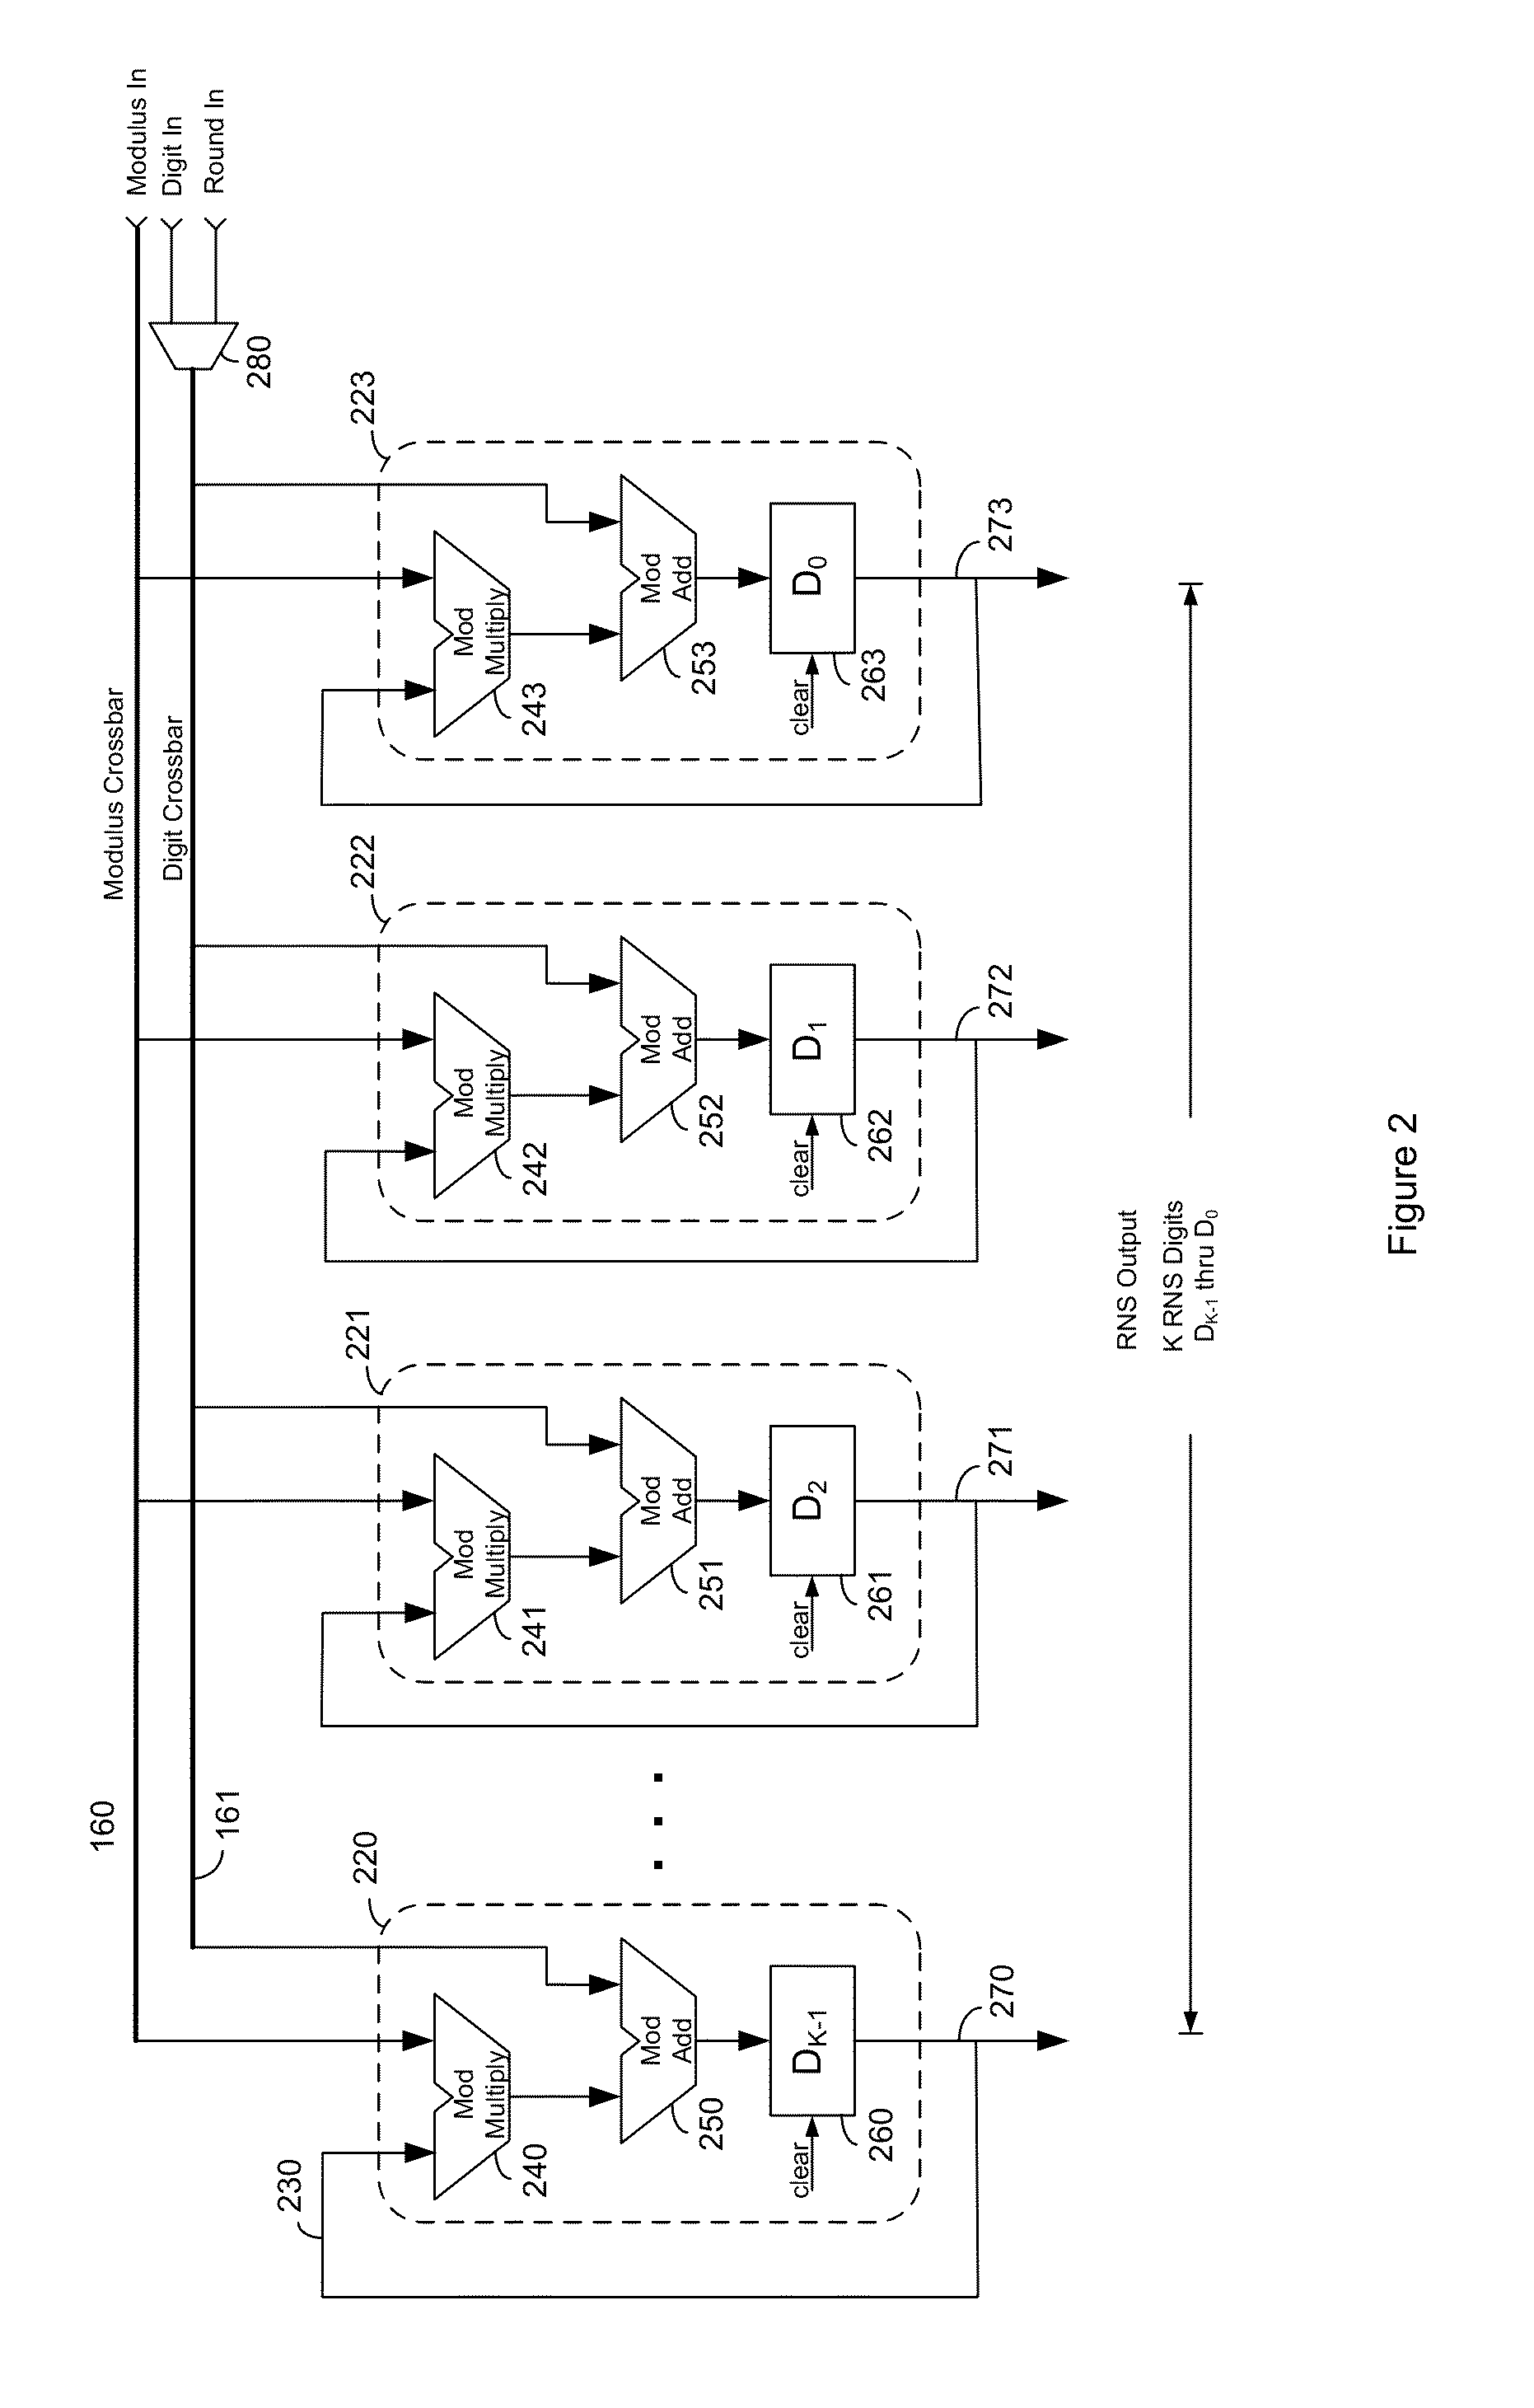 System and method for improved fractional binary to fractional residue converter and multipler